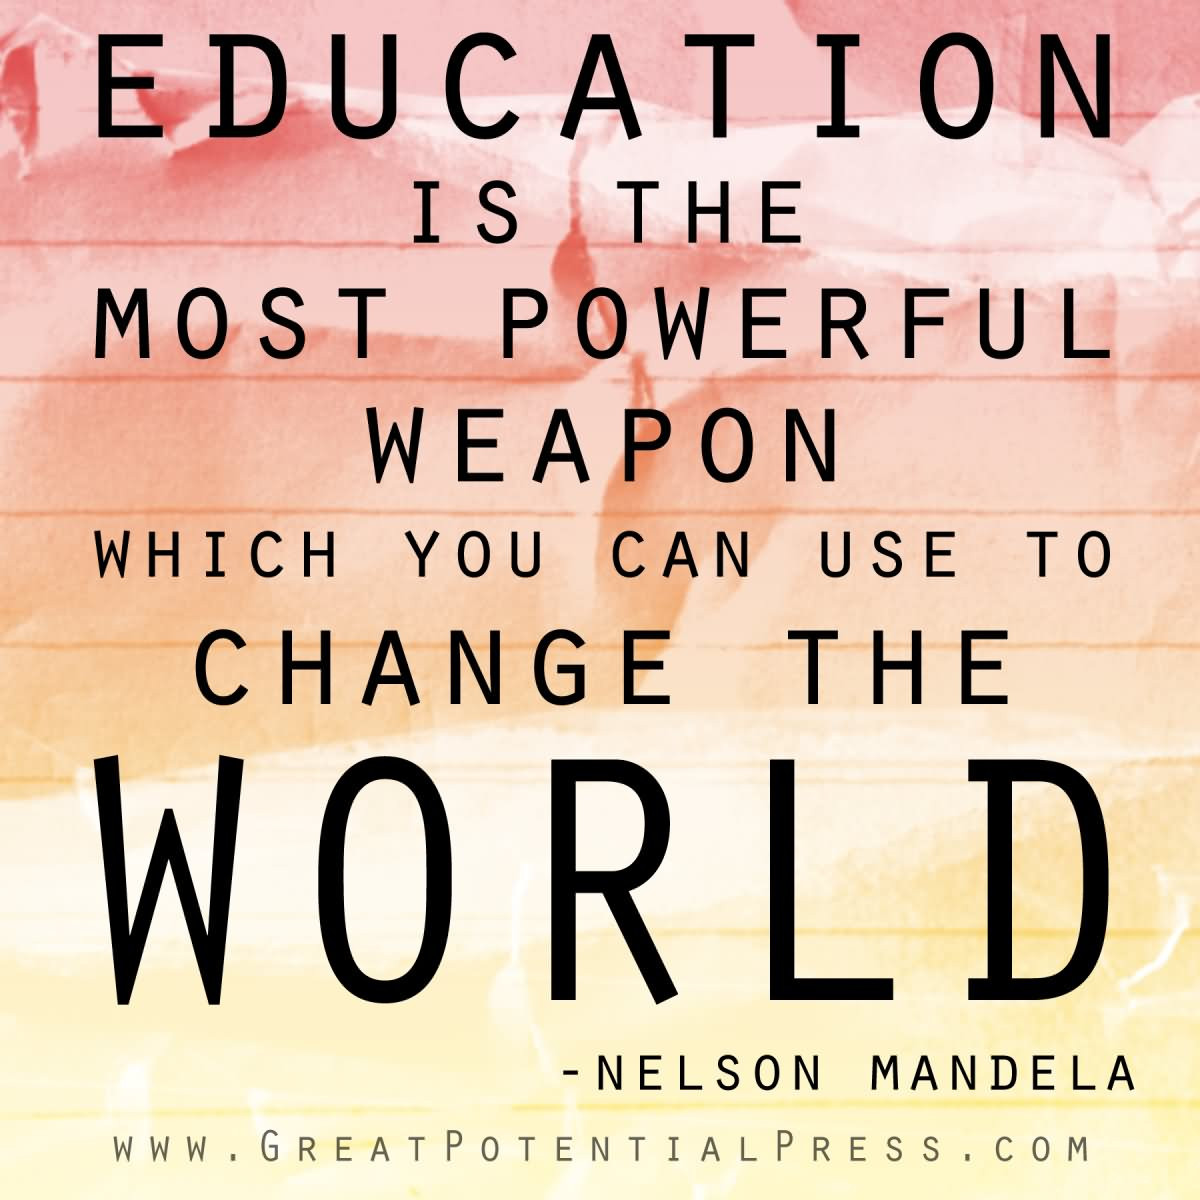 Nelson Mandela Quotes On Education
 Education is the most powerful weapon which you can use to